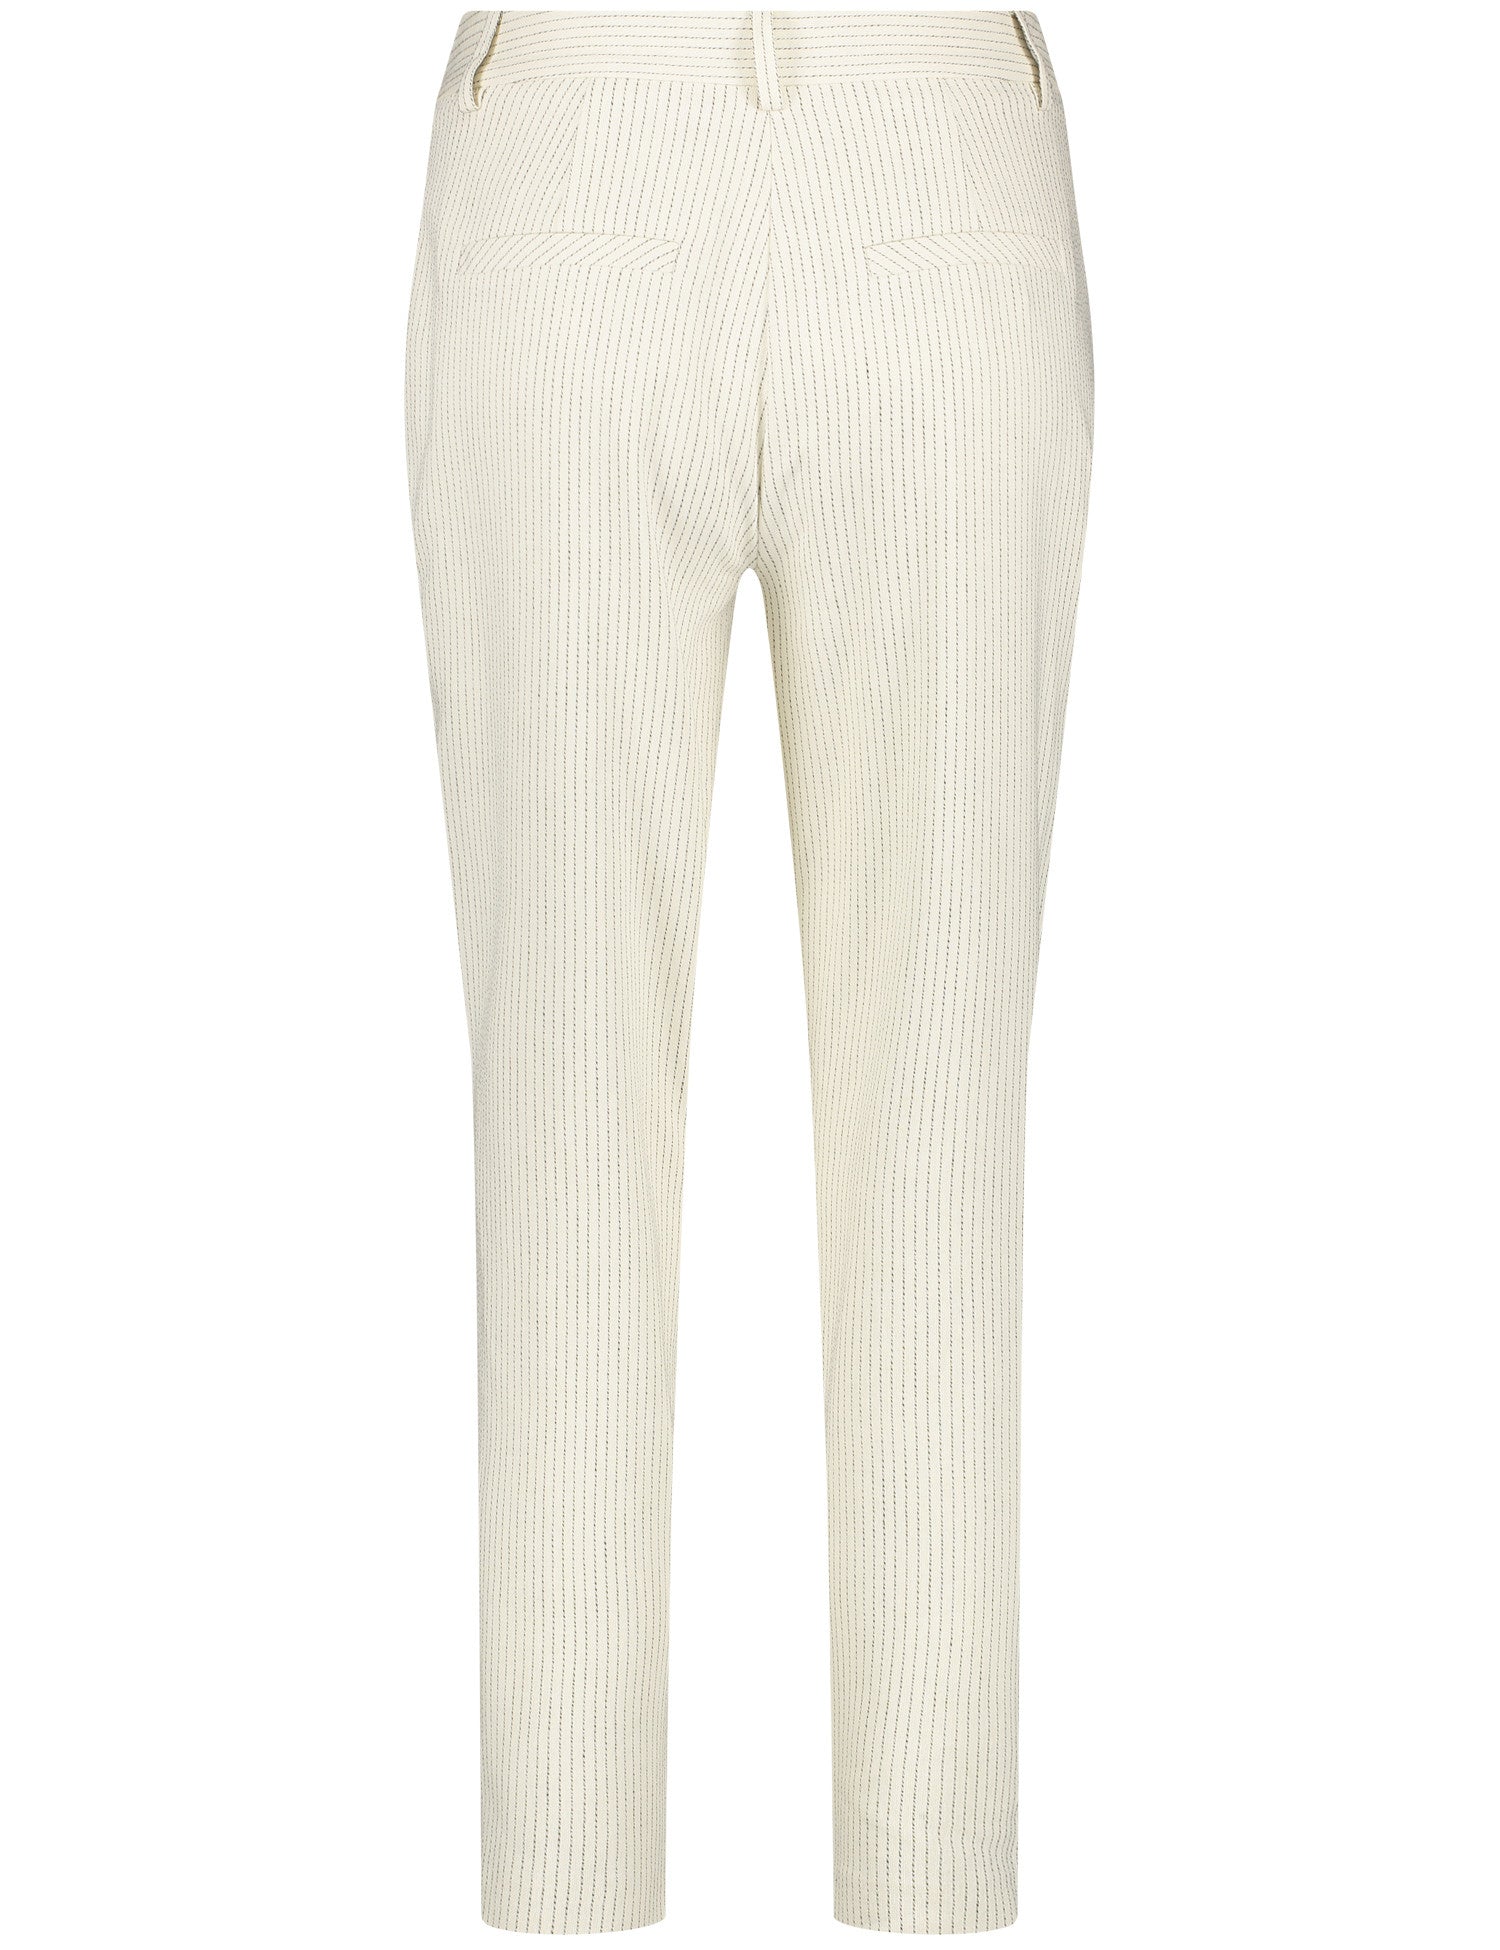 3/4-Length Trousers With Stripes, Slim Fit